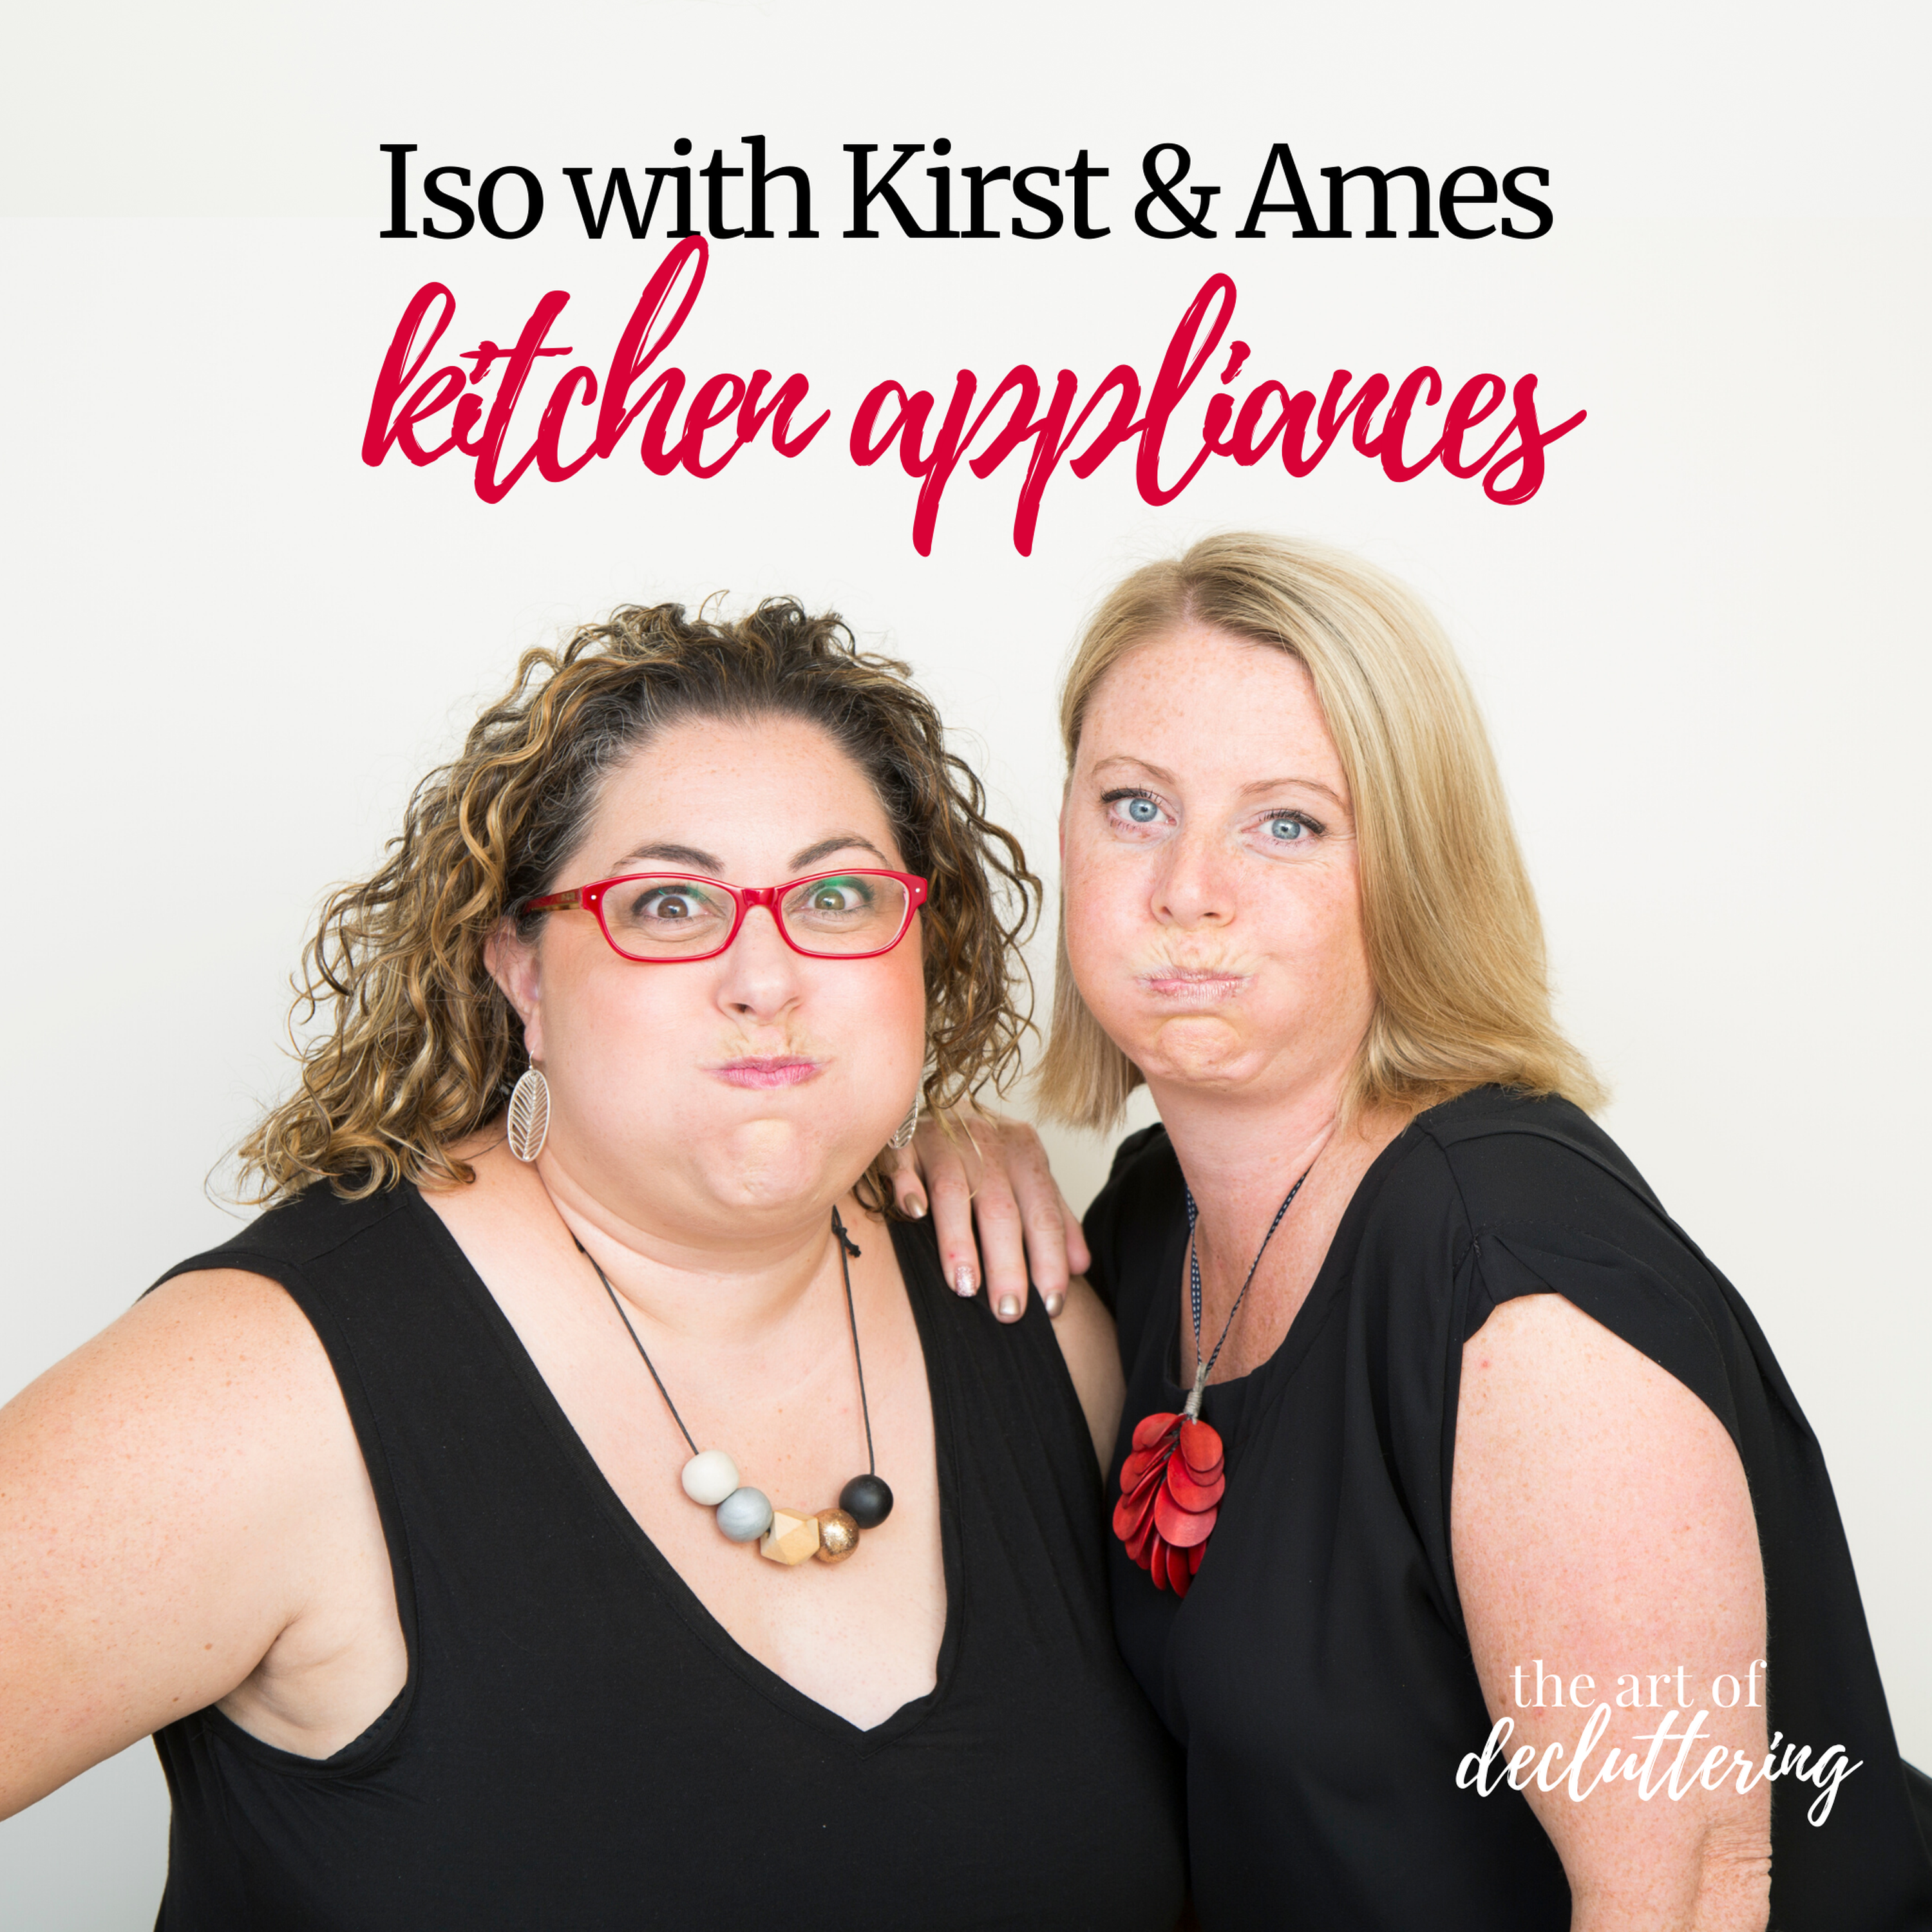 Iso with Kirst & Ames - Cutlery & Crockery